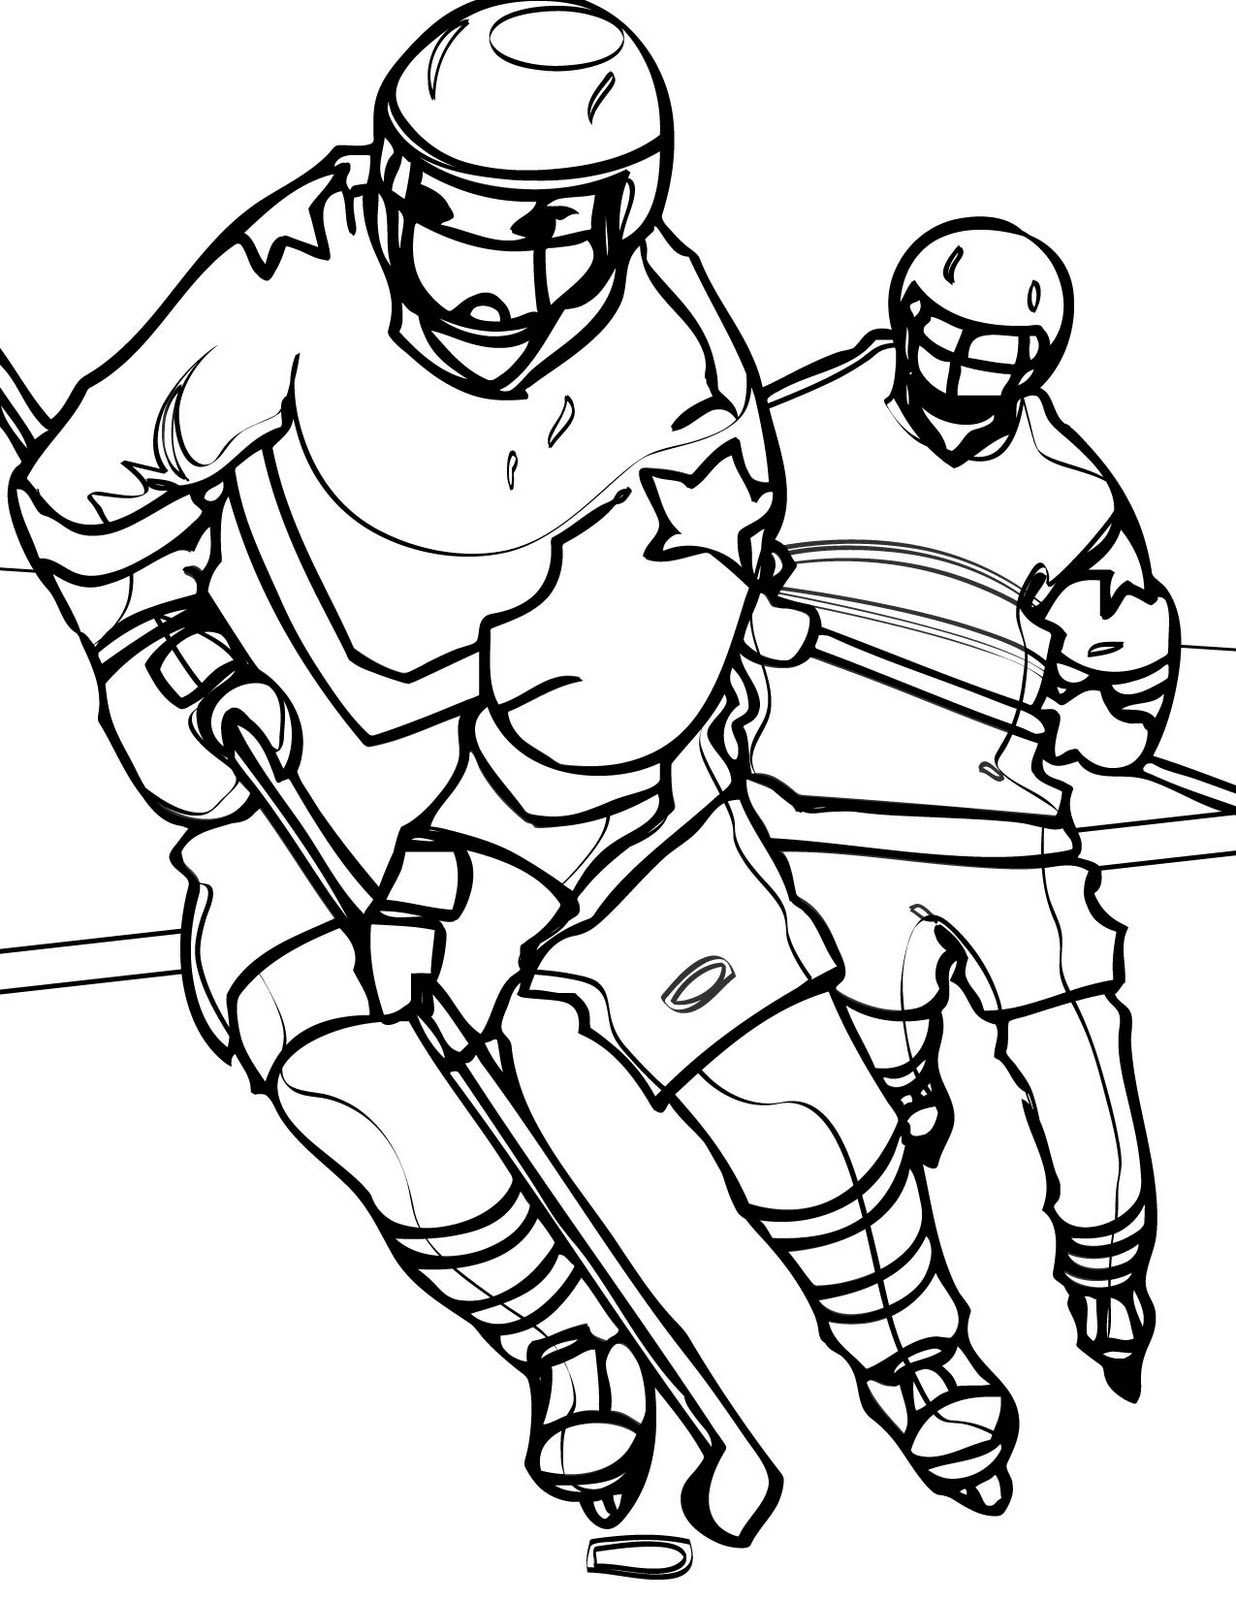 free hockey coloring pages free hockey coloring pages get coloring pages pages coloring free hockey 